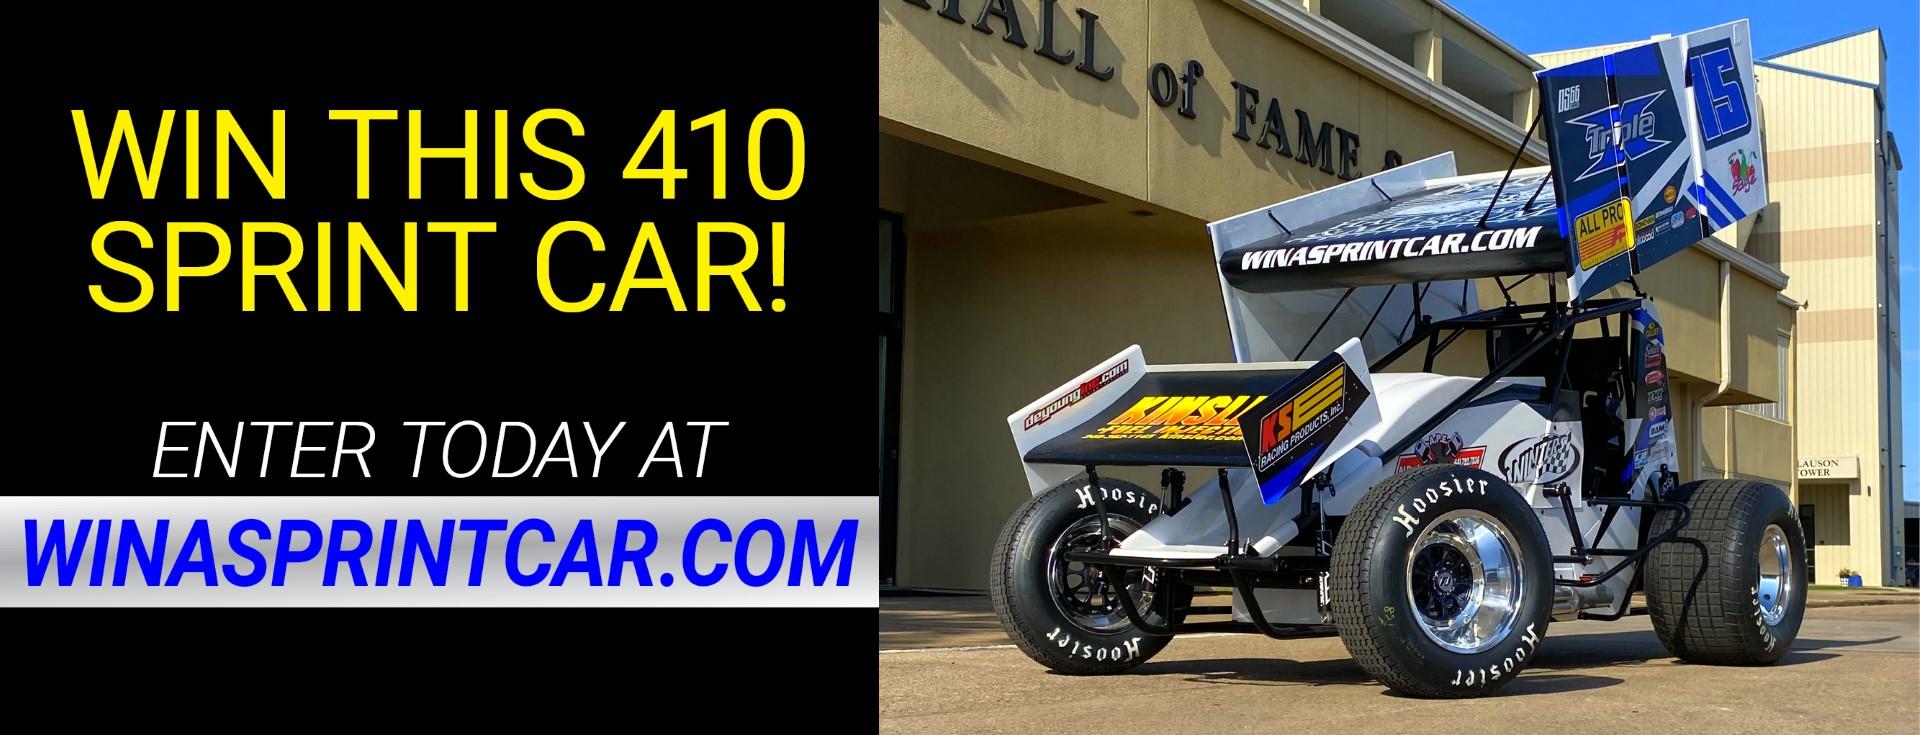 National Sprint Car Hall of Fame & Museum Triple X/Al Parker Engines 410 Sweepstakes Sprint Car Hits the West Coast!